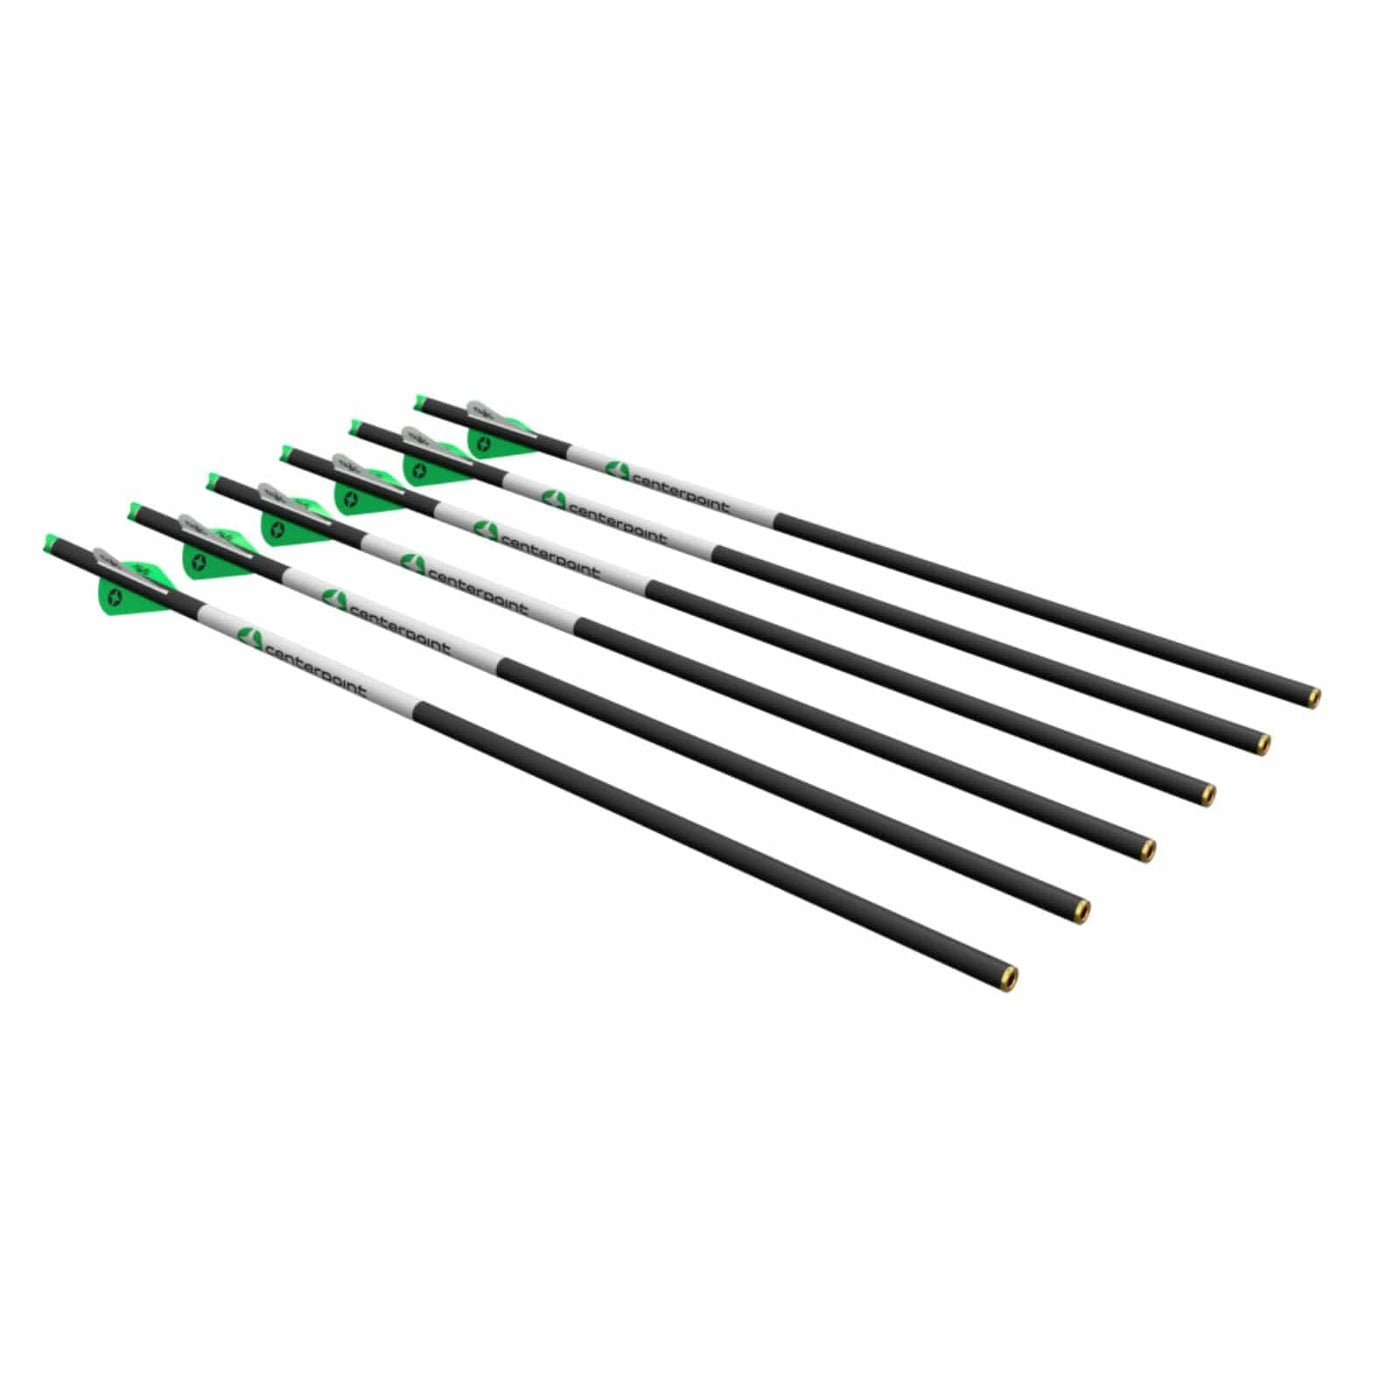 CenterPoint CenterPoint 20 inch Crossbow Bolts Archery